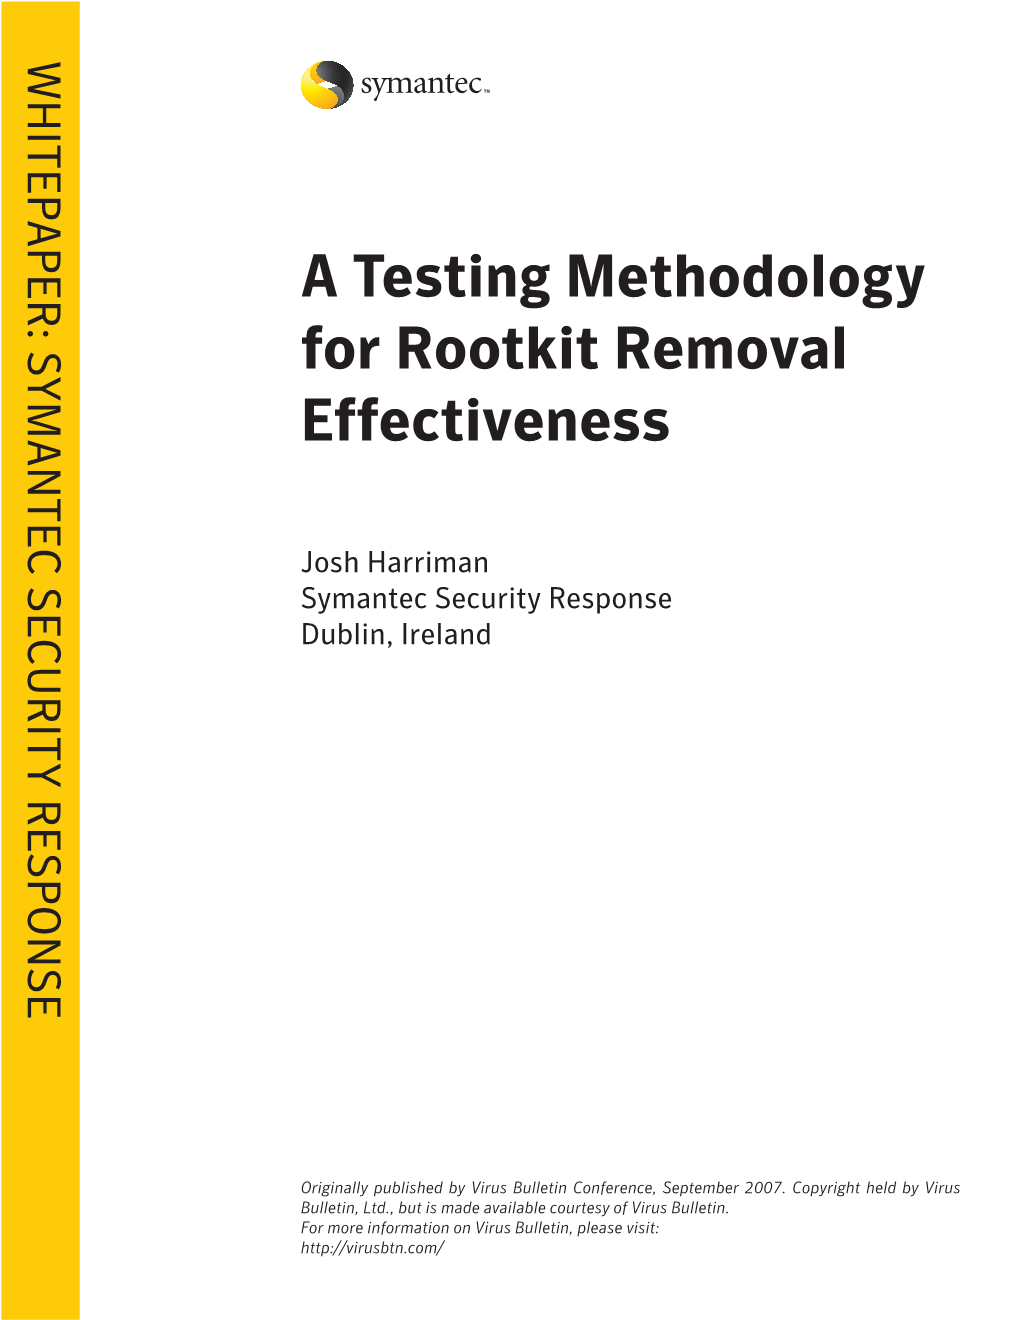 A Testing Methodology for Rootkit Removal Effectiveness